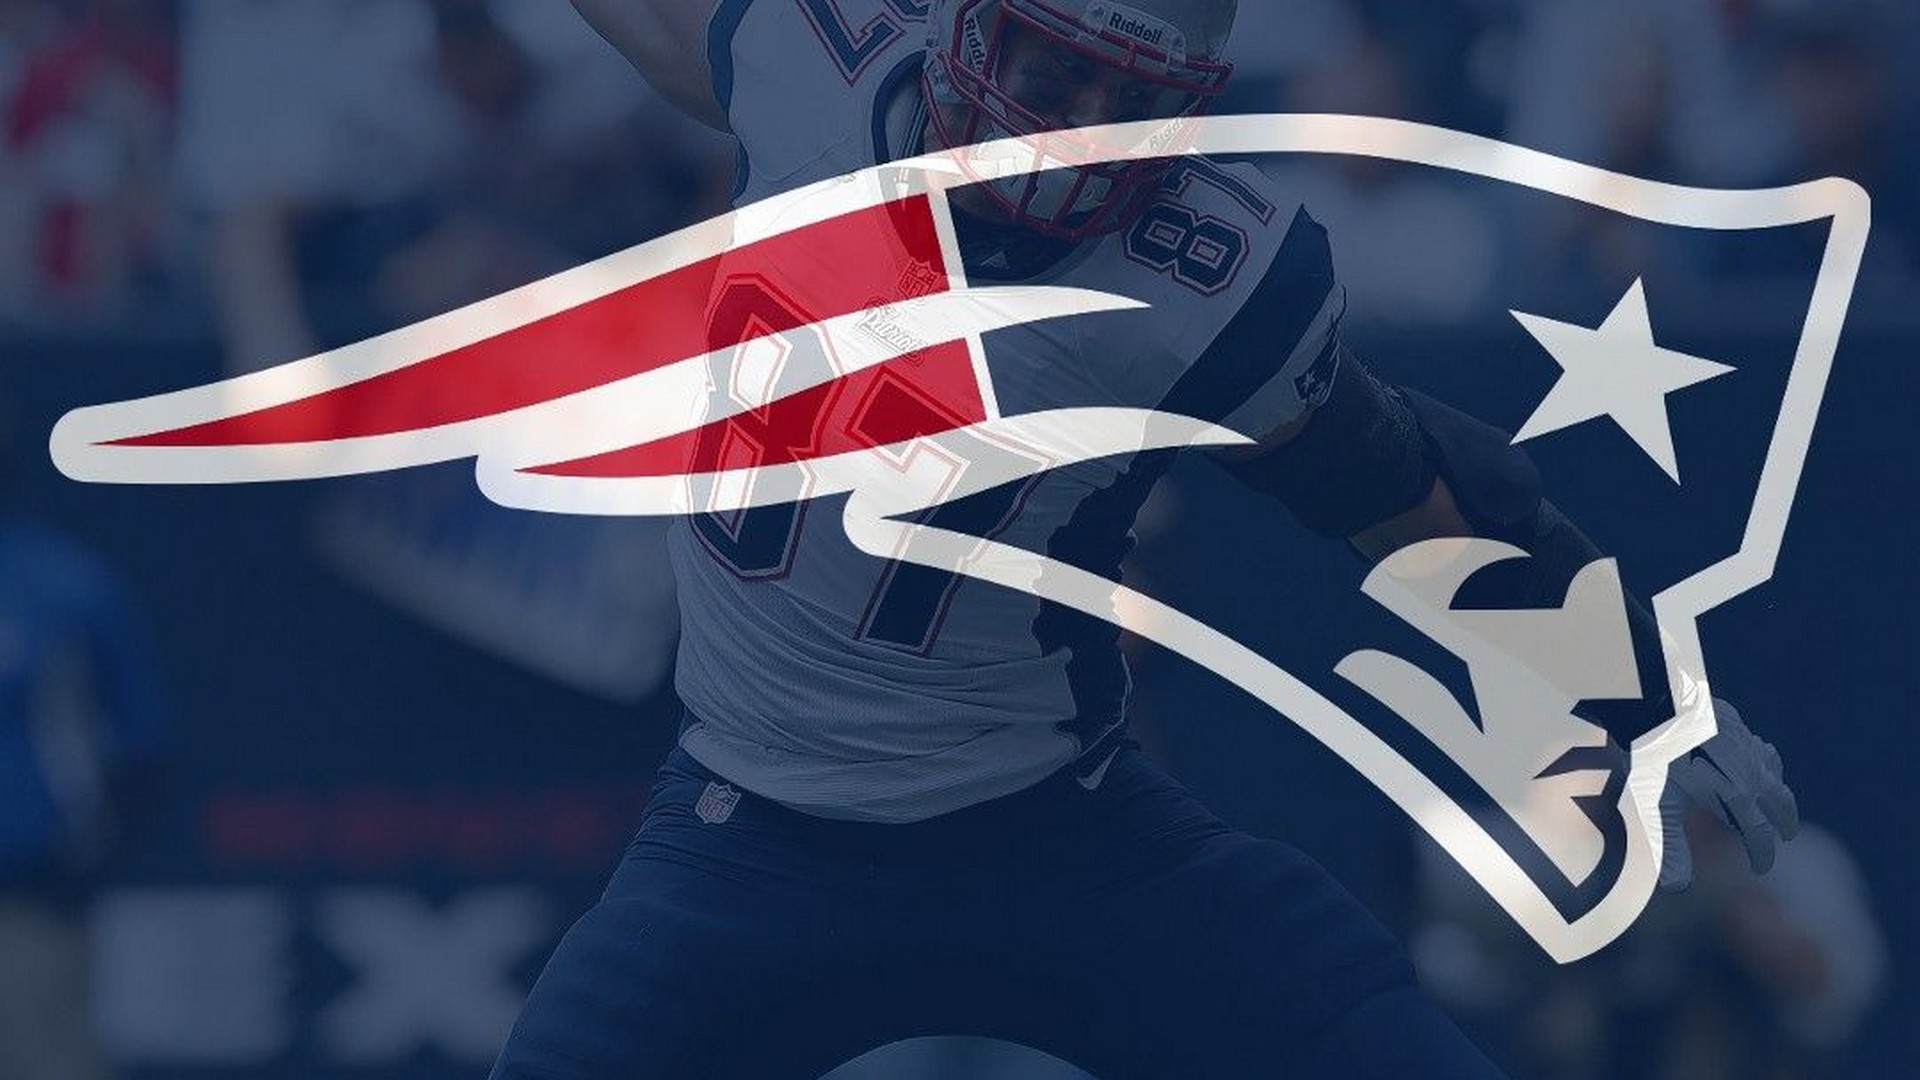 Best New England Patriots Wallpaper in HD With high-resolution 1920X1080 pixel. Download and set as wallpaper for Desktop Computer, Apple iPhone X, XS Max, XR, 8, 7, 6, SE, iPad, Android